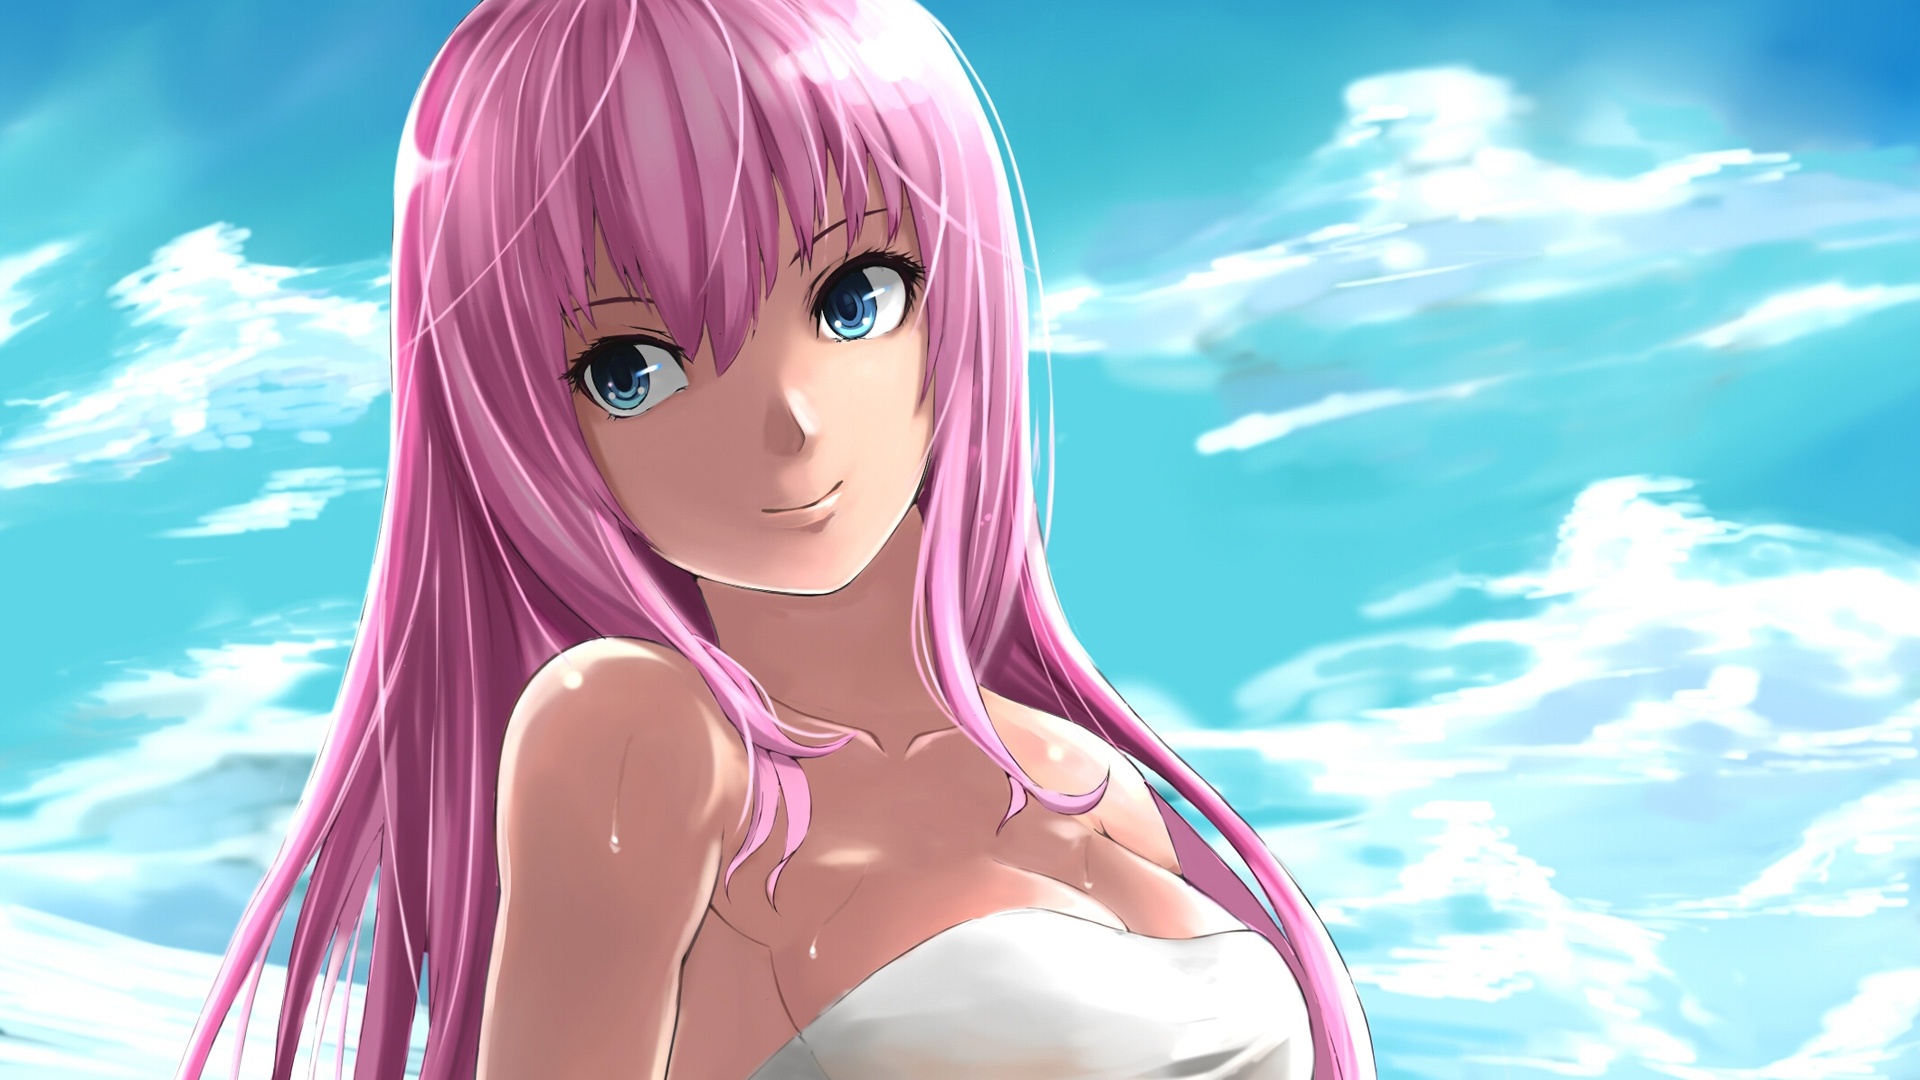 Anime-girl-smiling-pink-hair-the-blue-sky-and-white-clouds_1080.jpg